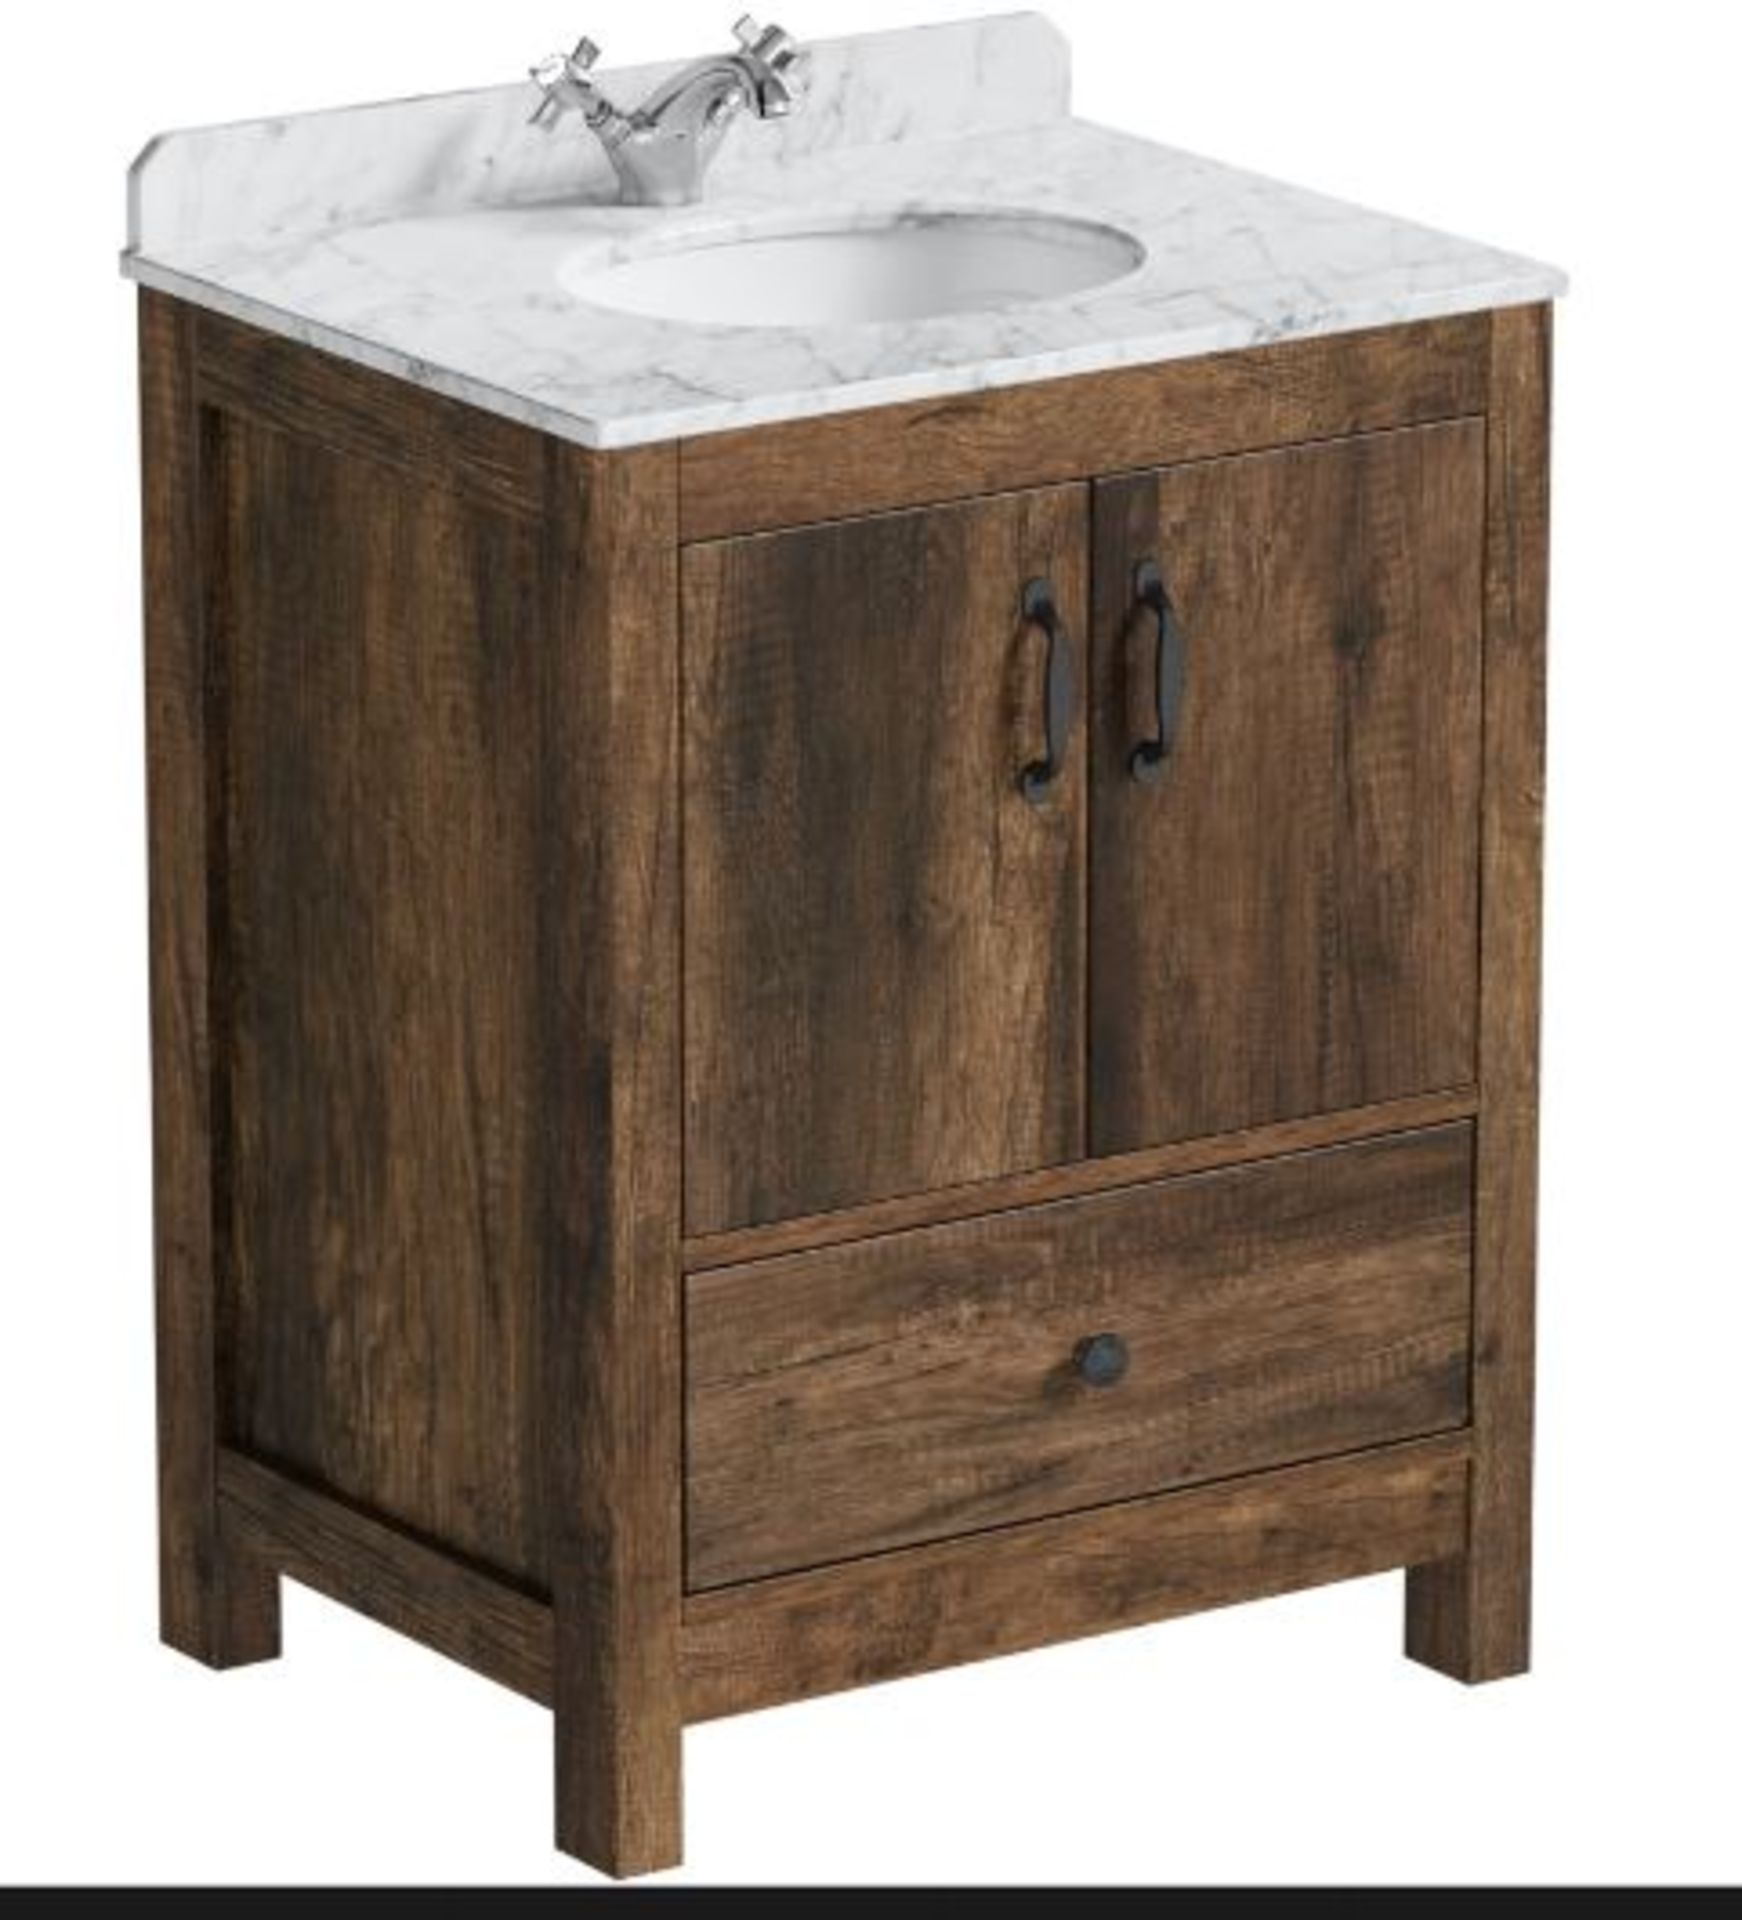 RRP £325. The Bath Co. Dalston floorstanding vanity unit. Appears New Unused. Unit Only